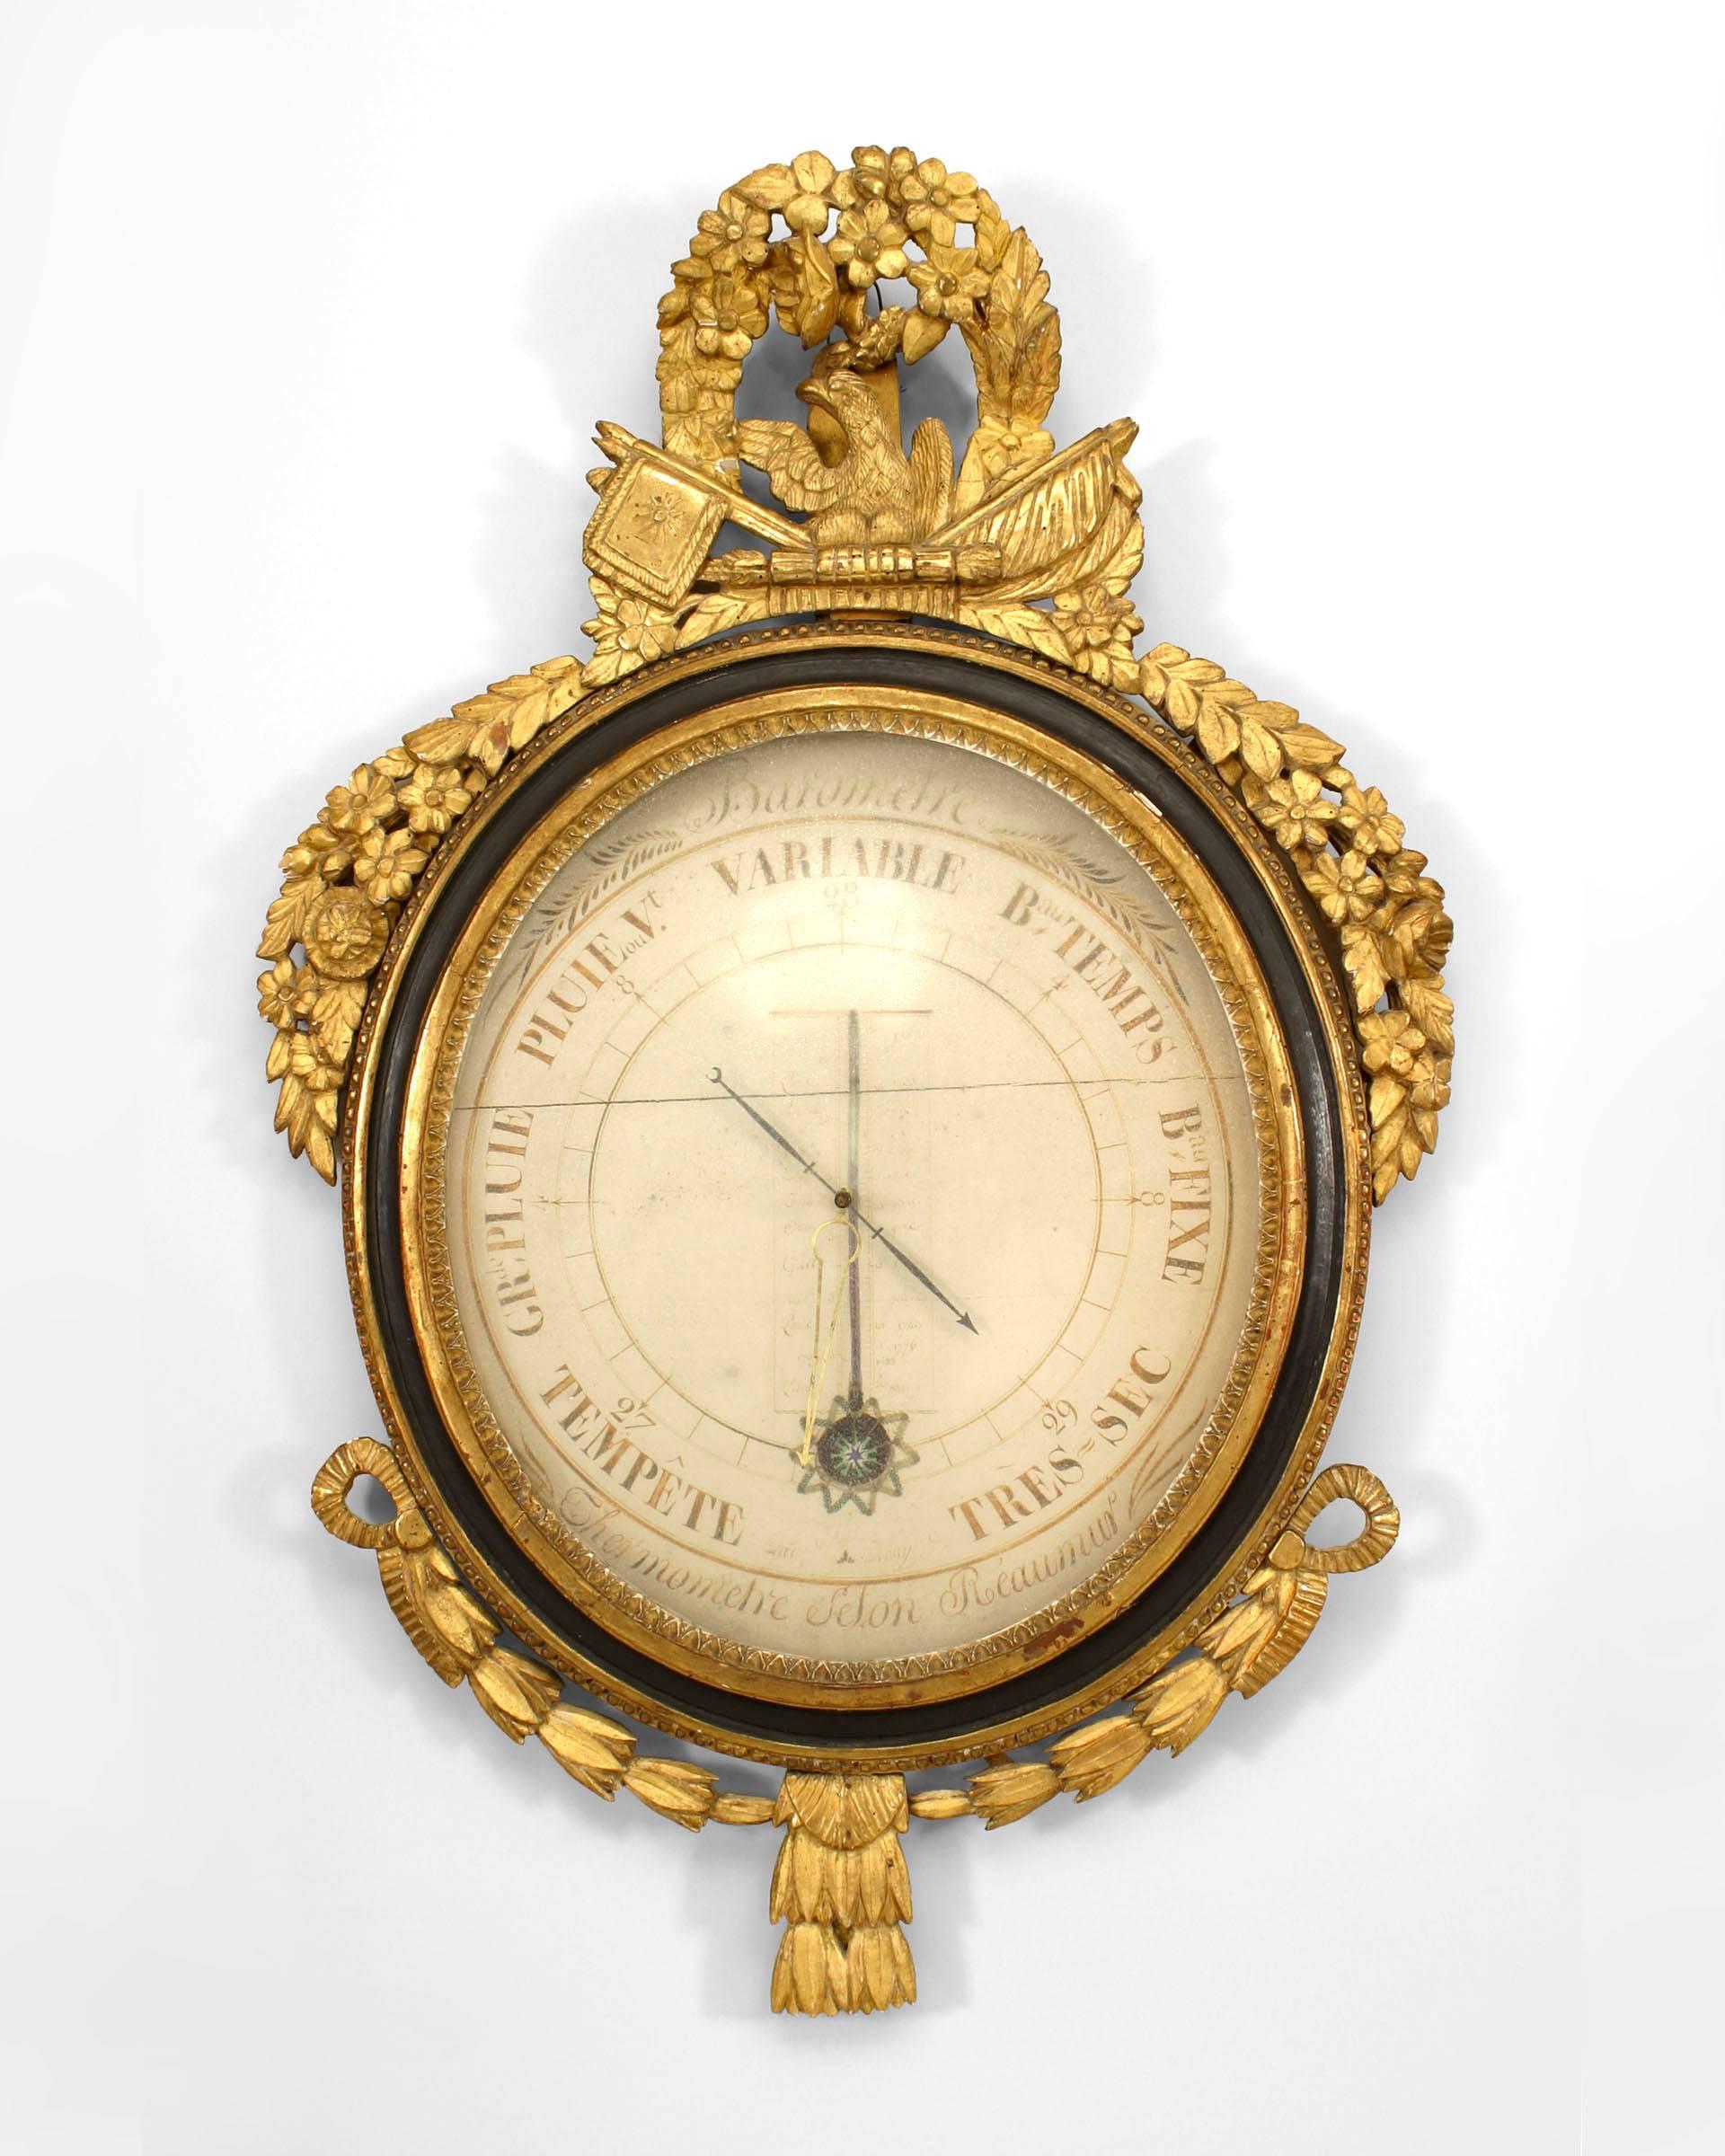 French Louis XVI (18th Century) barometer with original scientific illustrations and mercury vial framed with gilt foliate carvings & ebonized trim and a perched eagle pediment.
